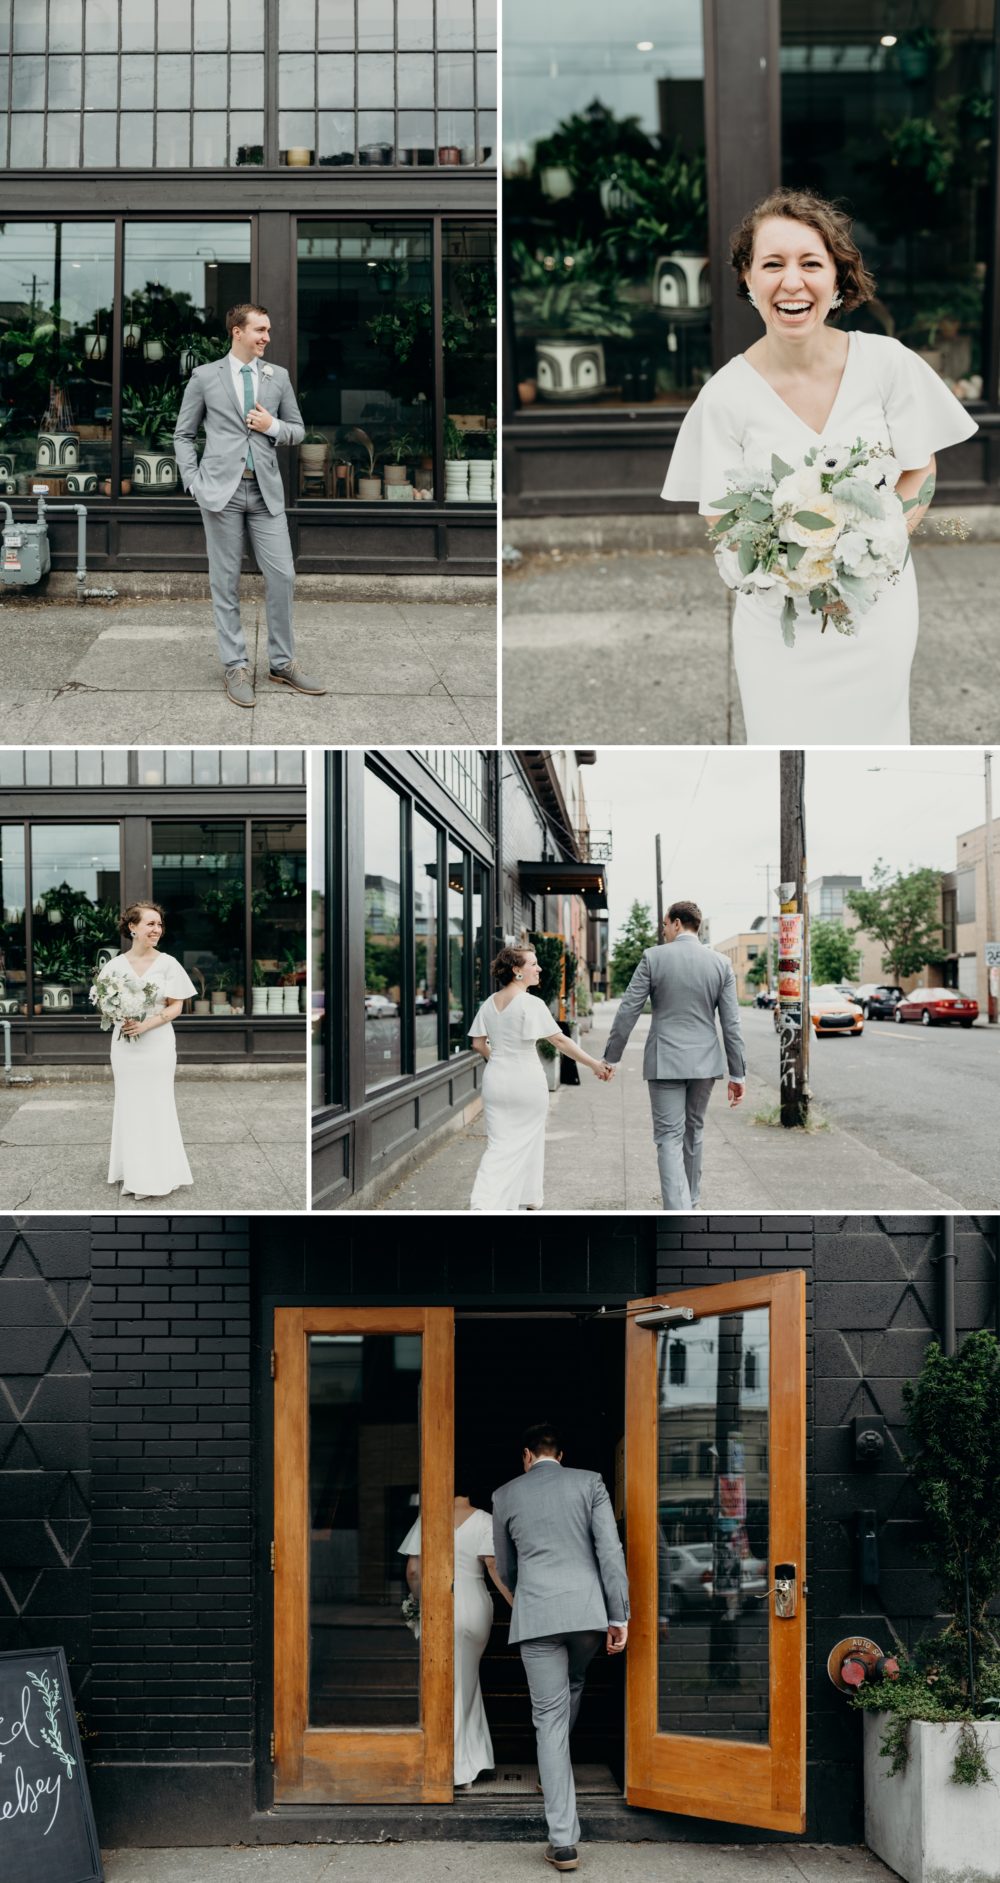 Cute and classy bride and groom by Portland wedding photographer Briana Morrison